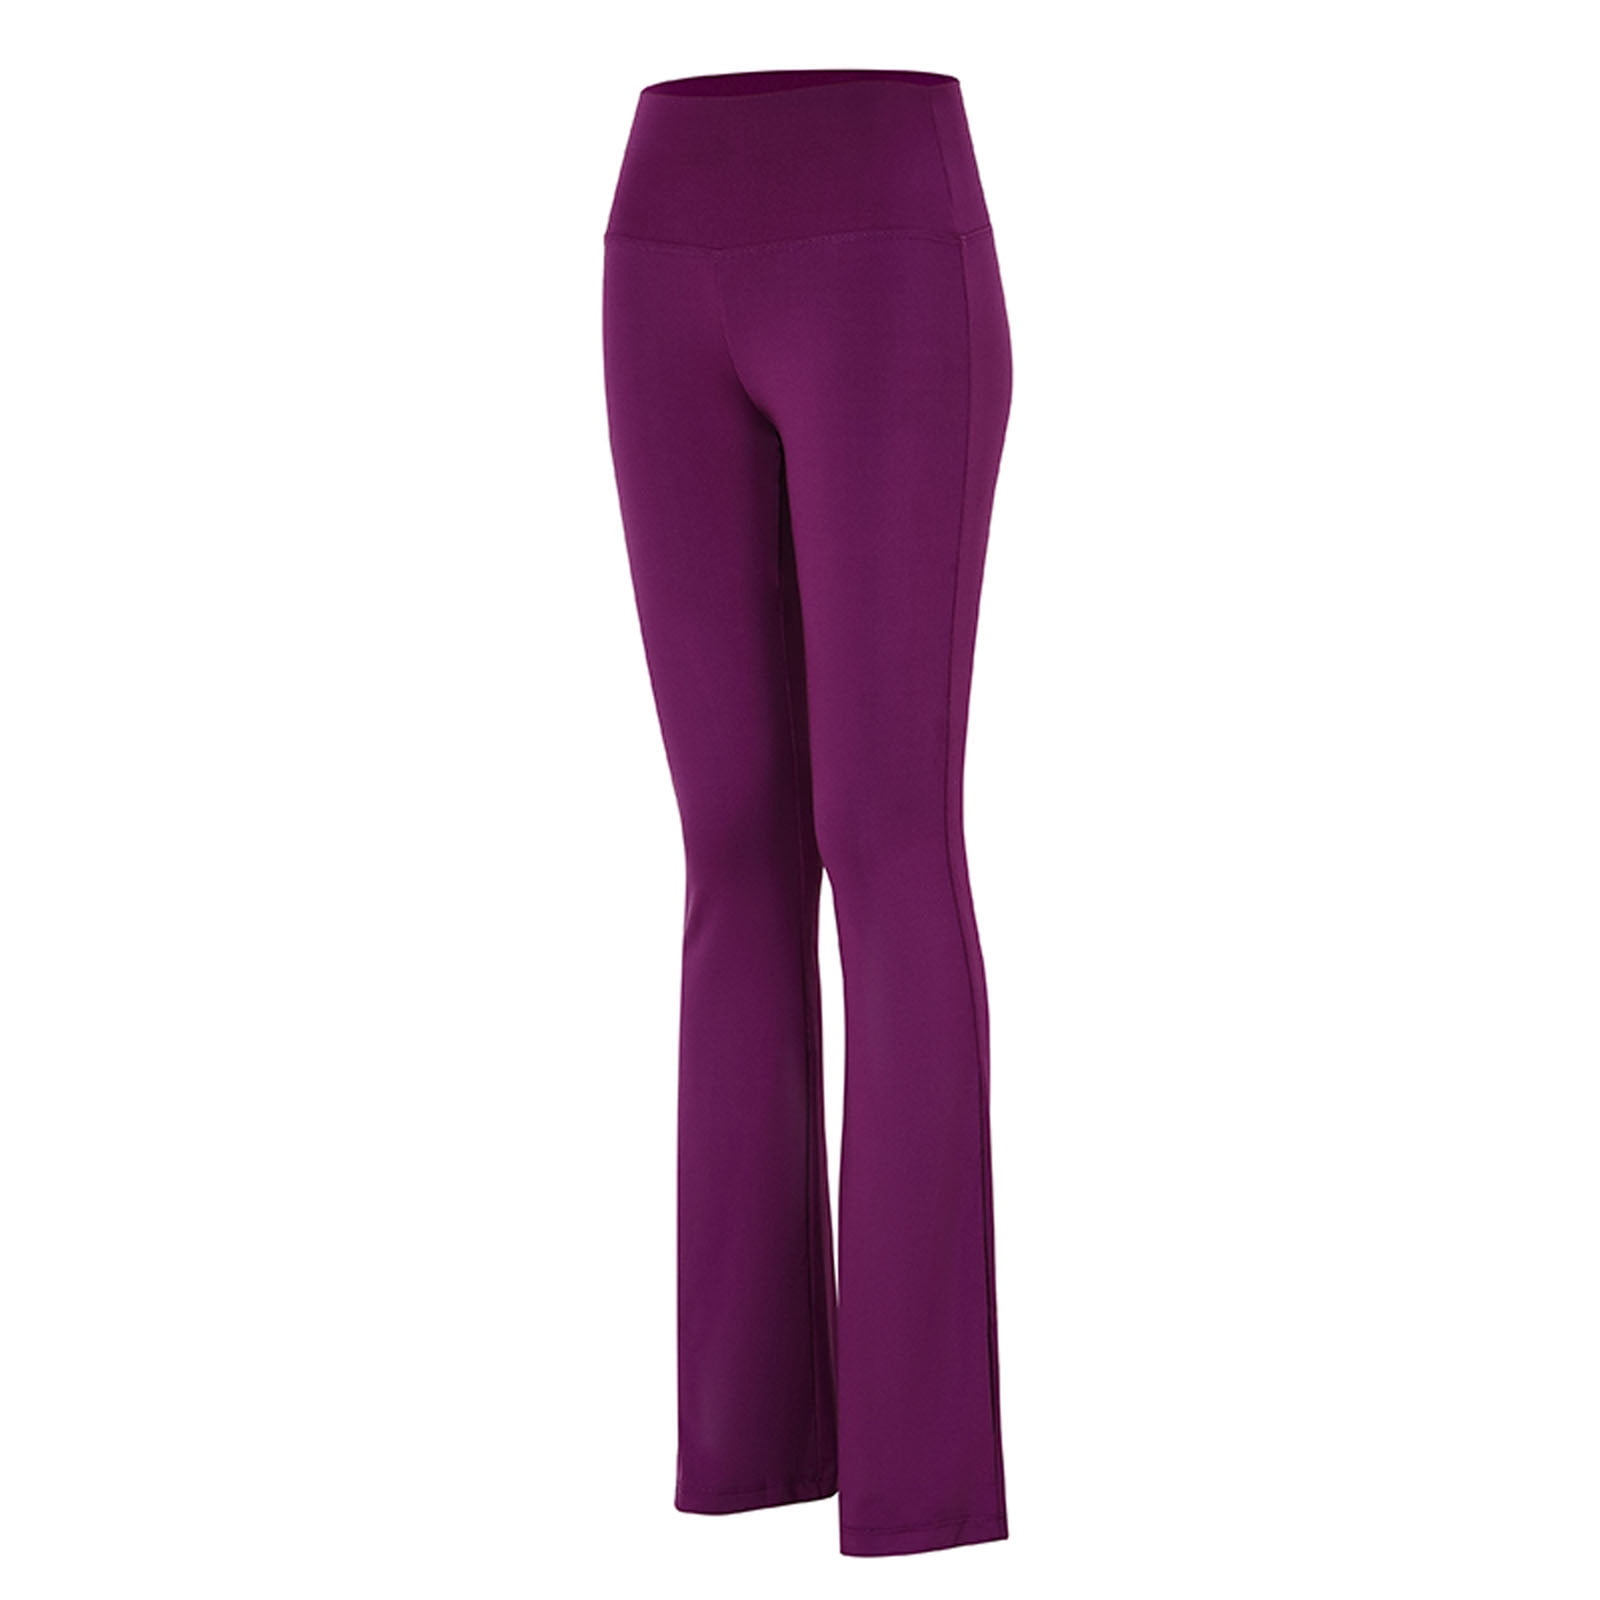 Set Active Luxform Leggings Purple Size XL - $75 New With Tags - From Jens